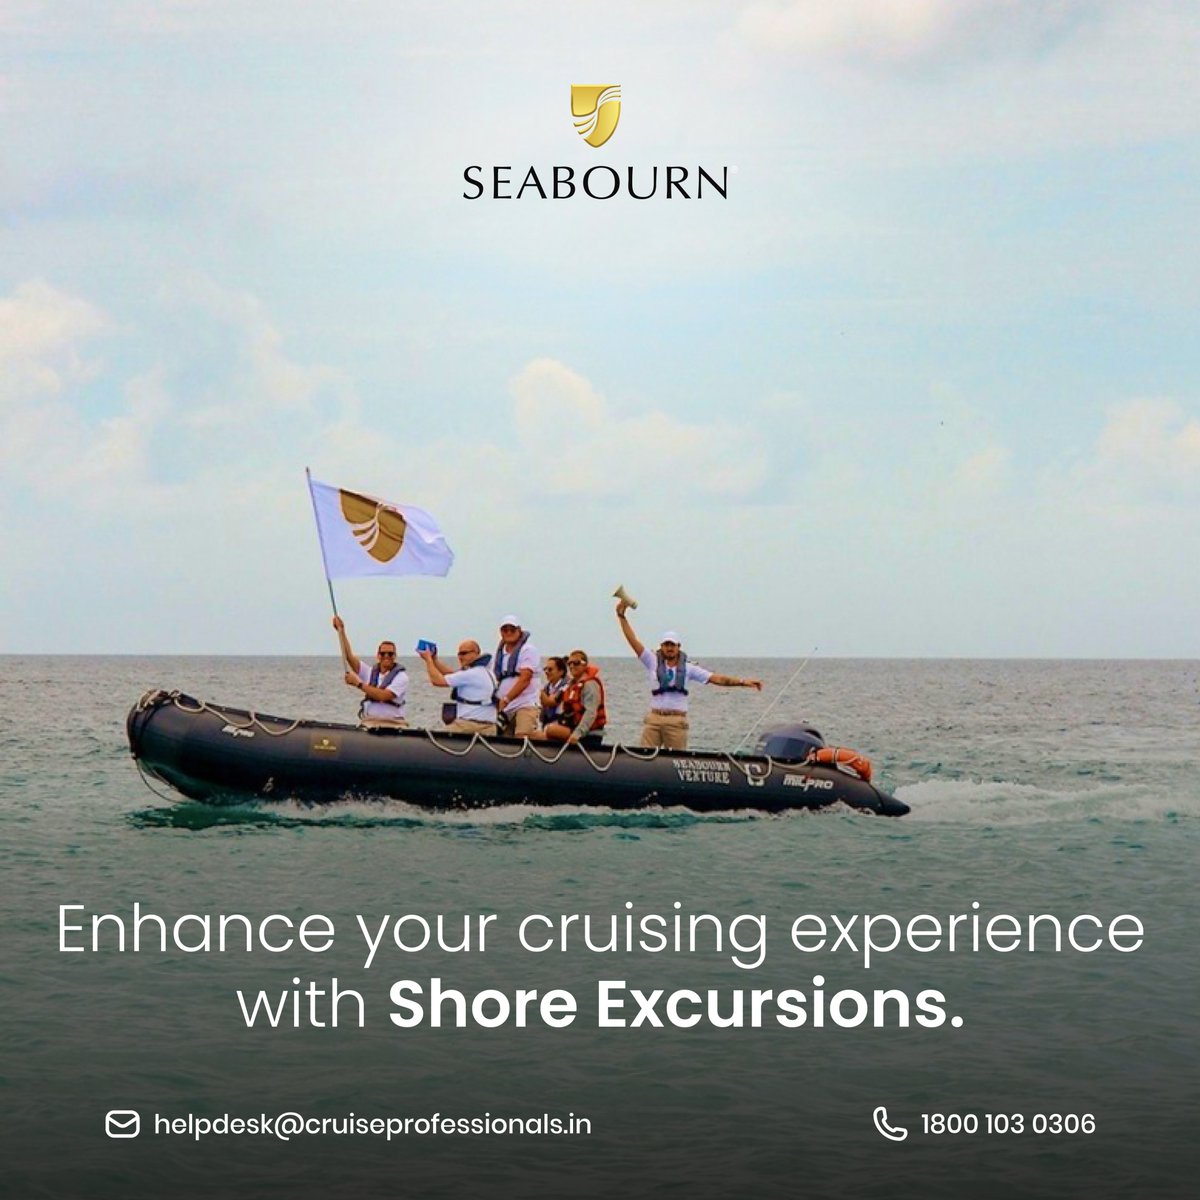 Enhance your cruising experience with Shore Excursions. Which offers unique opportunities to experience the best of our extraordinary worlds.

#seabourn #cruiseprofessionals #luxurytravel #seabournmoments #seastheday #cruising